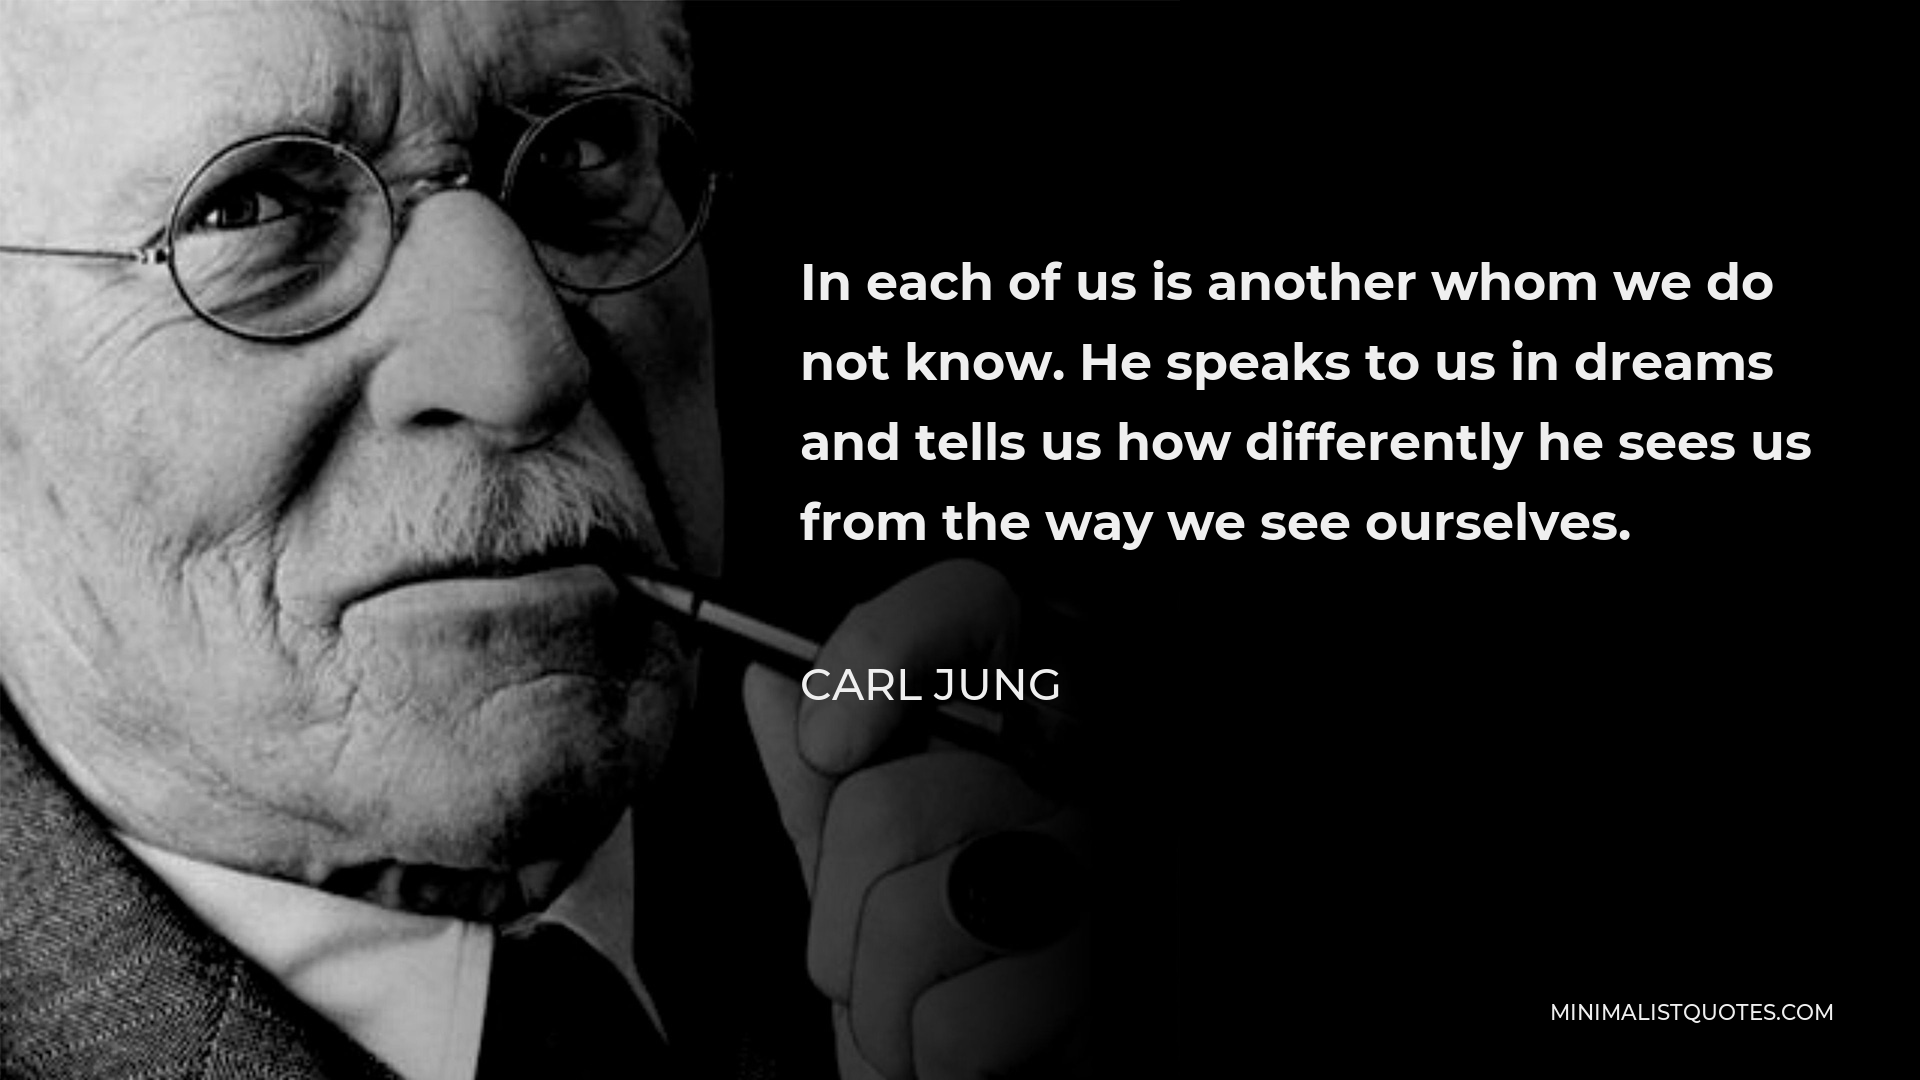 Carl Jung Quote - In each of us is another whom we do not know. He speaks to us in dreams and tells us how differently he sees us from the way we see ourselves.